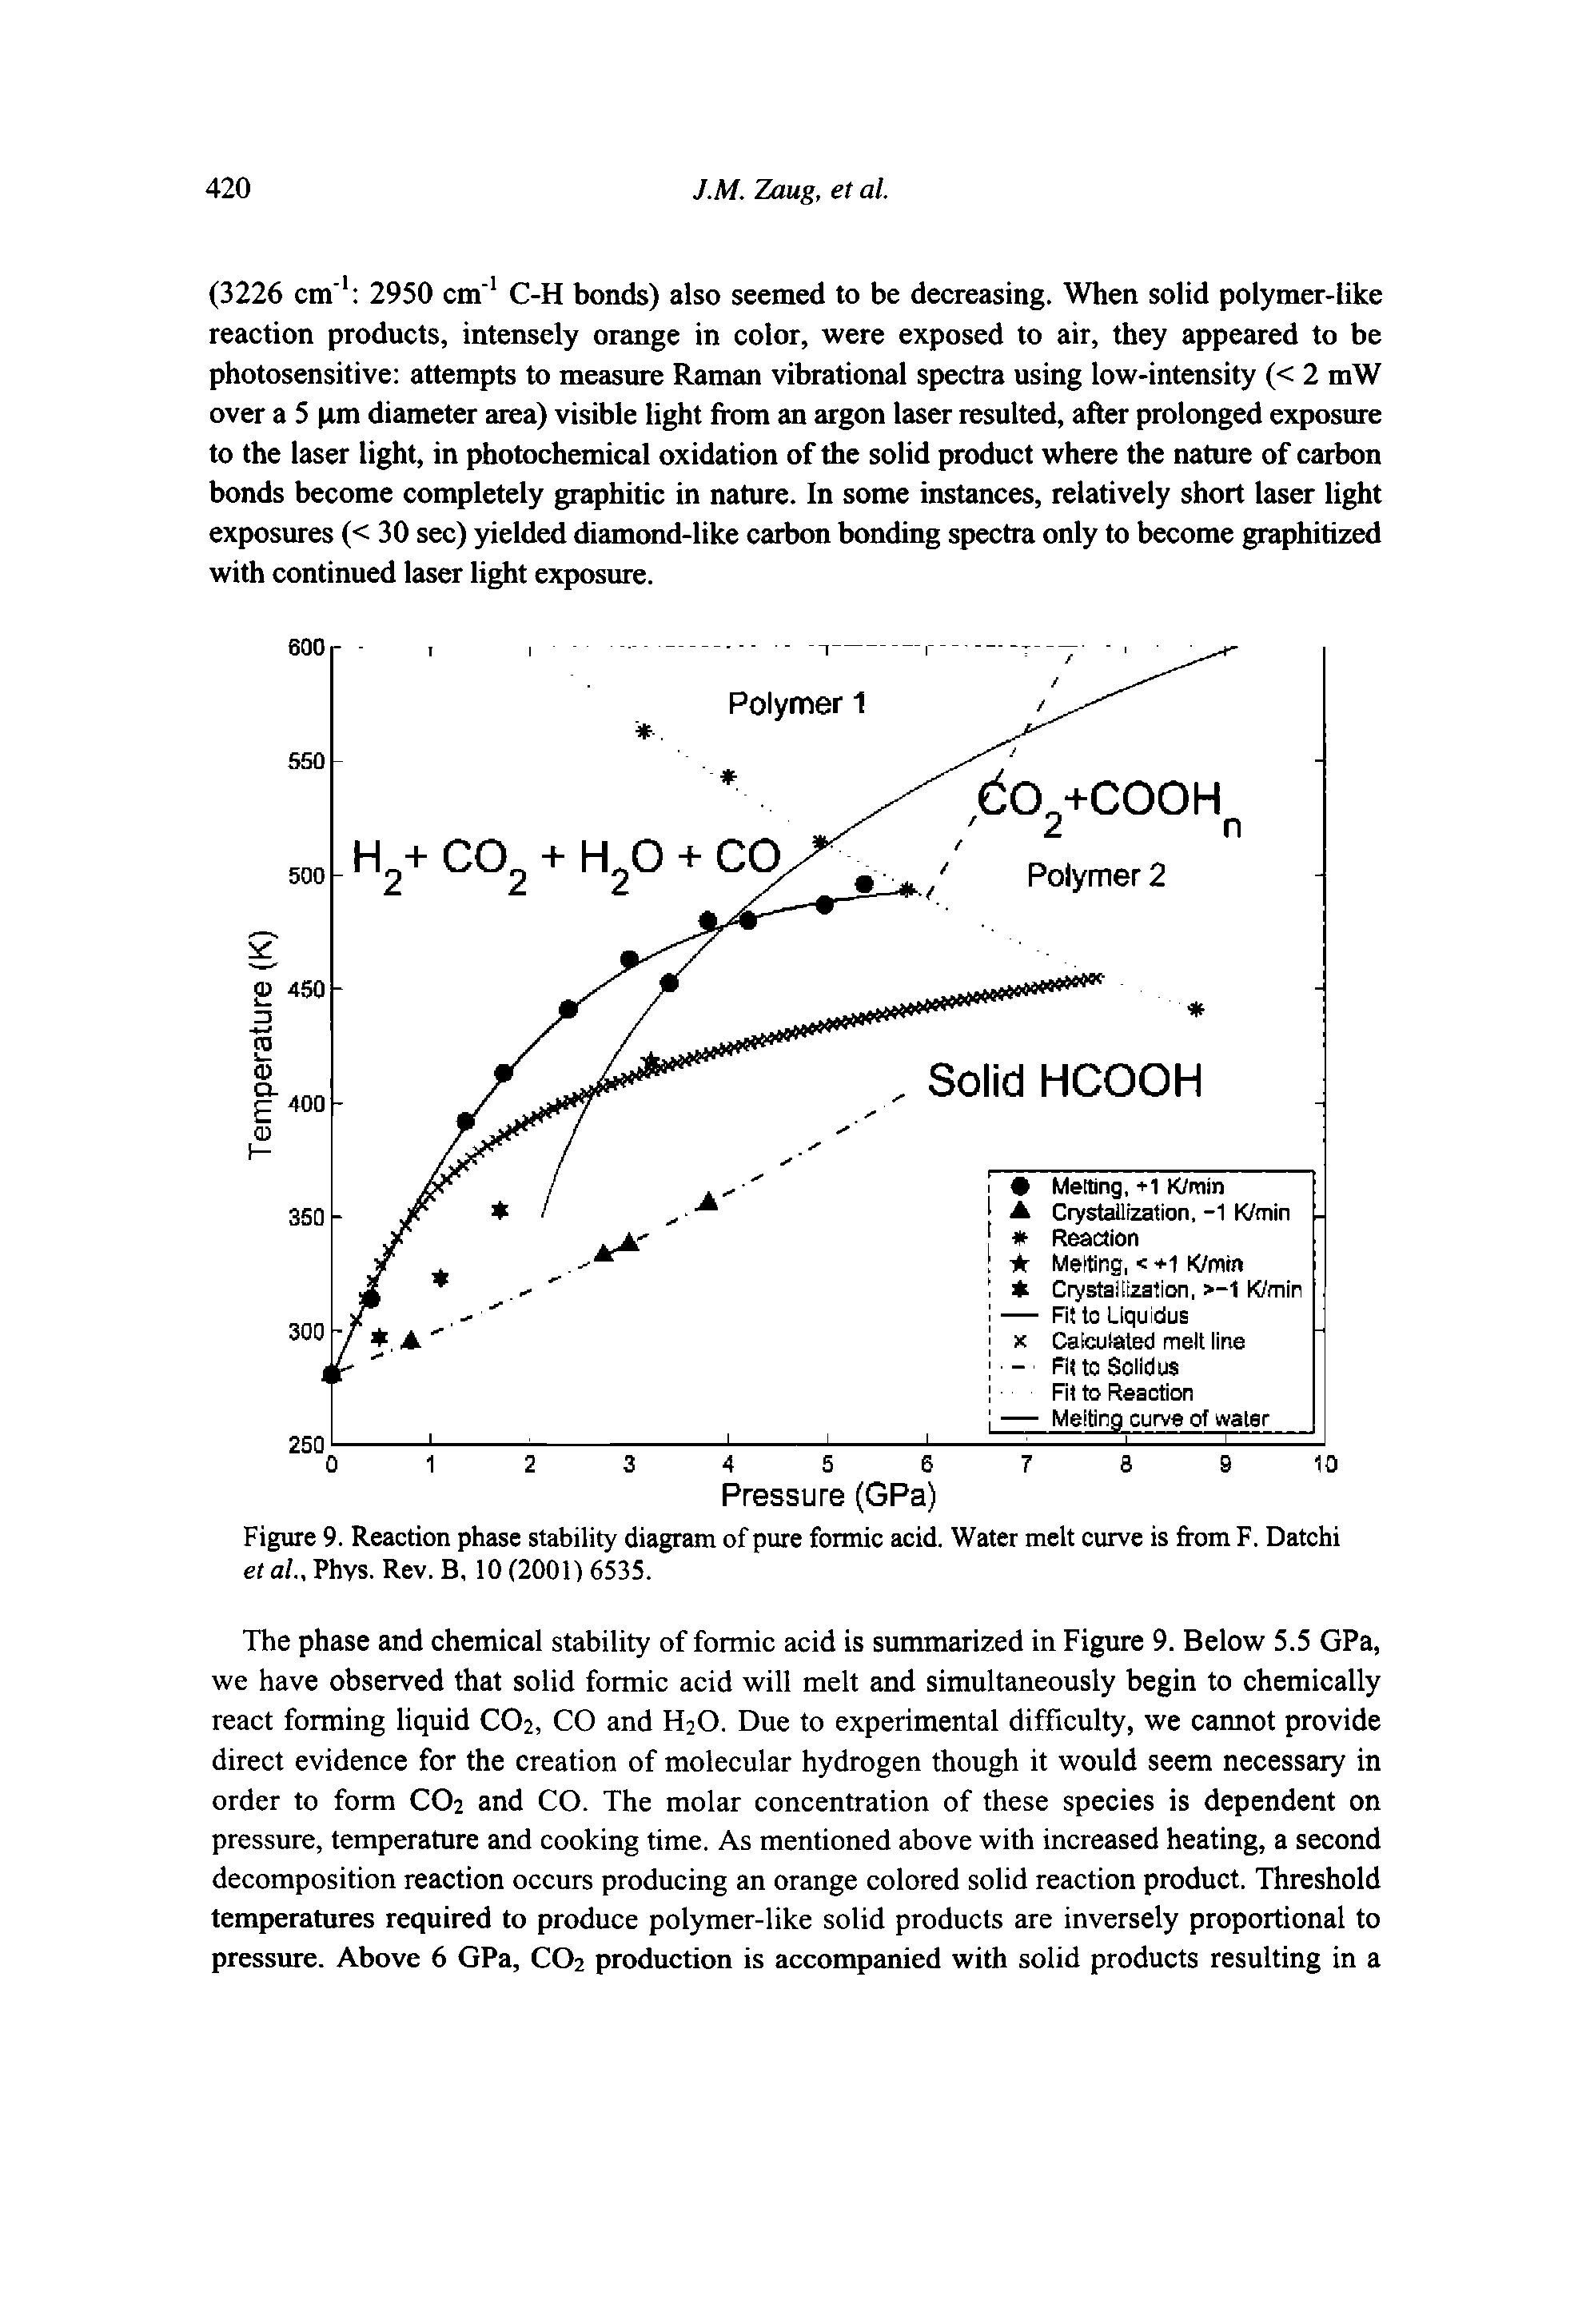 Figure 9. Reaction phase stability diagram of pure formic acid. Water melt curve is from F. Datchi et al., Phvs. Rev. B, 10 (2001) 6535.